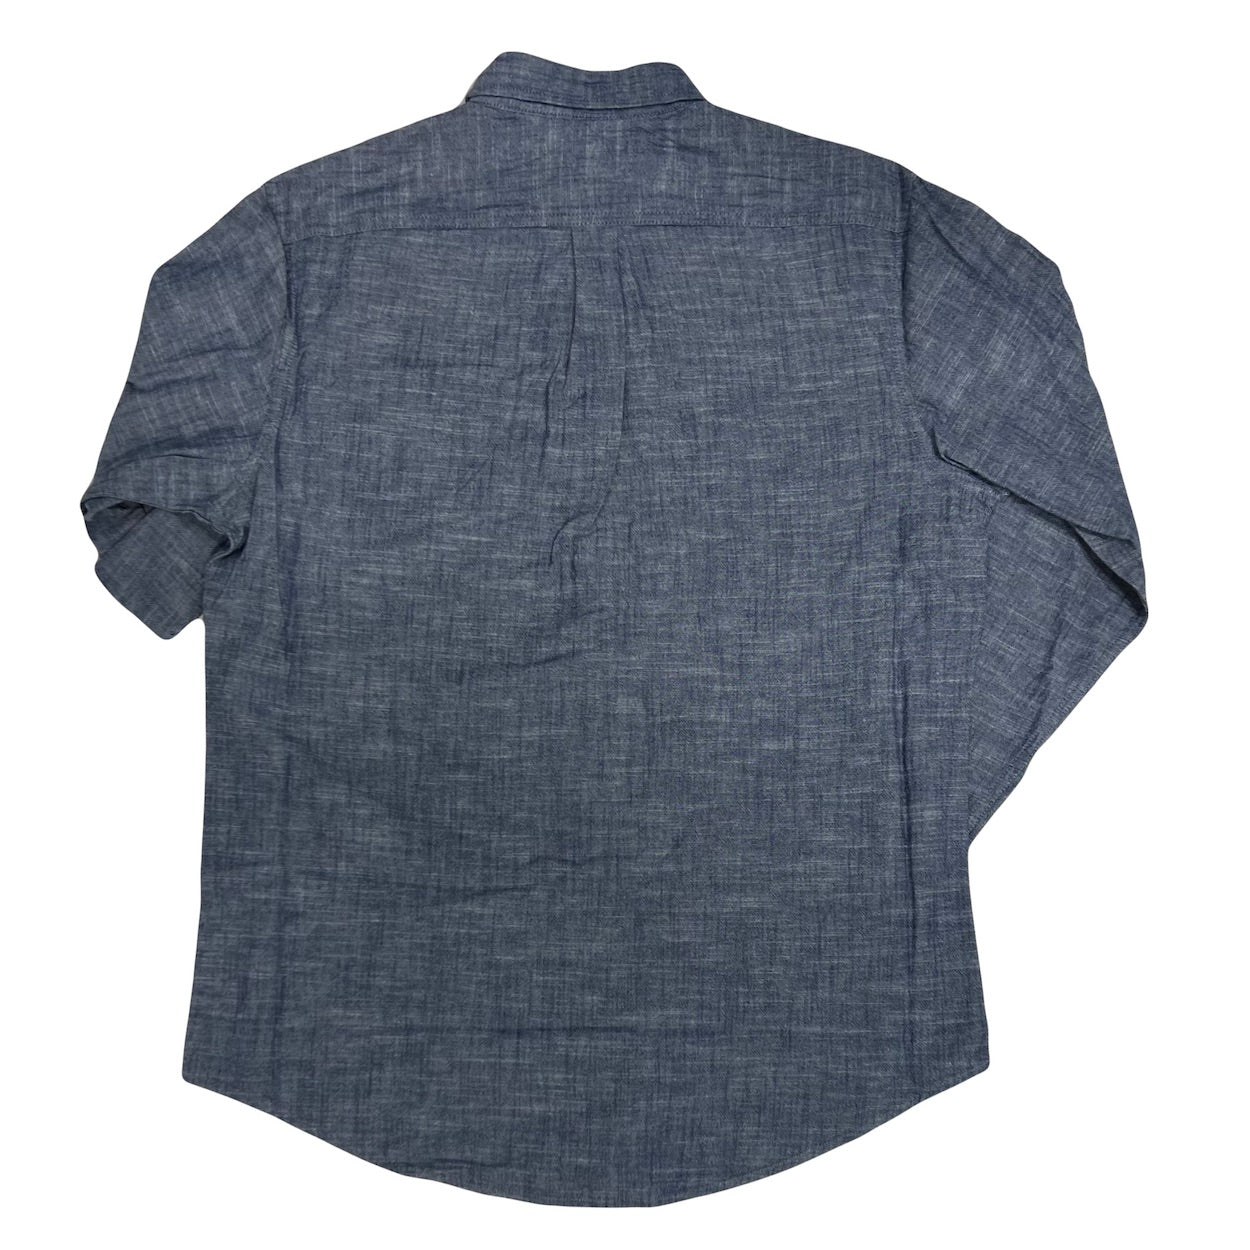 Jean Button Up Relaxed Classics T Shirts 